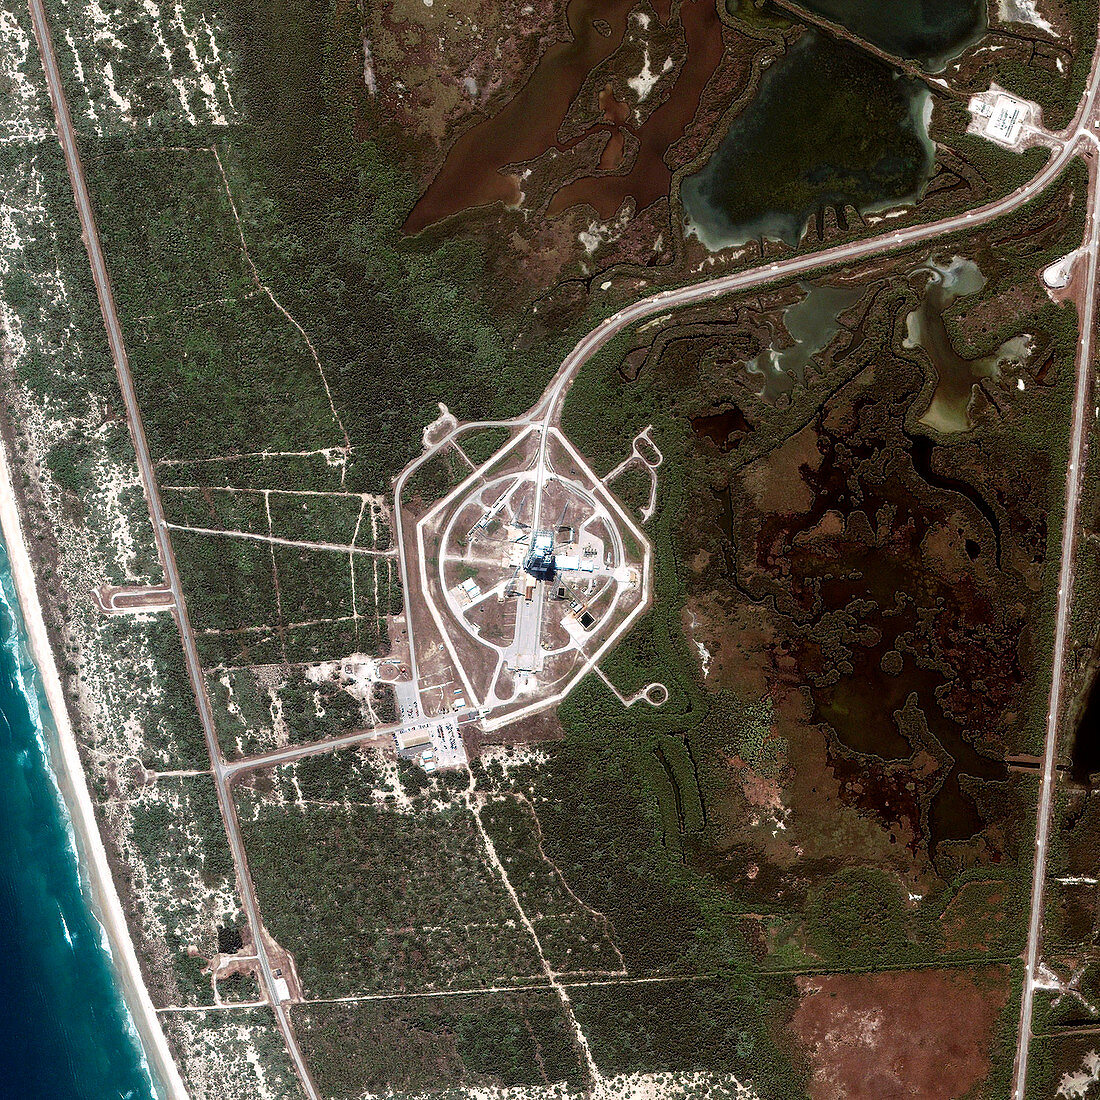 Cape Canaveral,launch pad 40